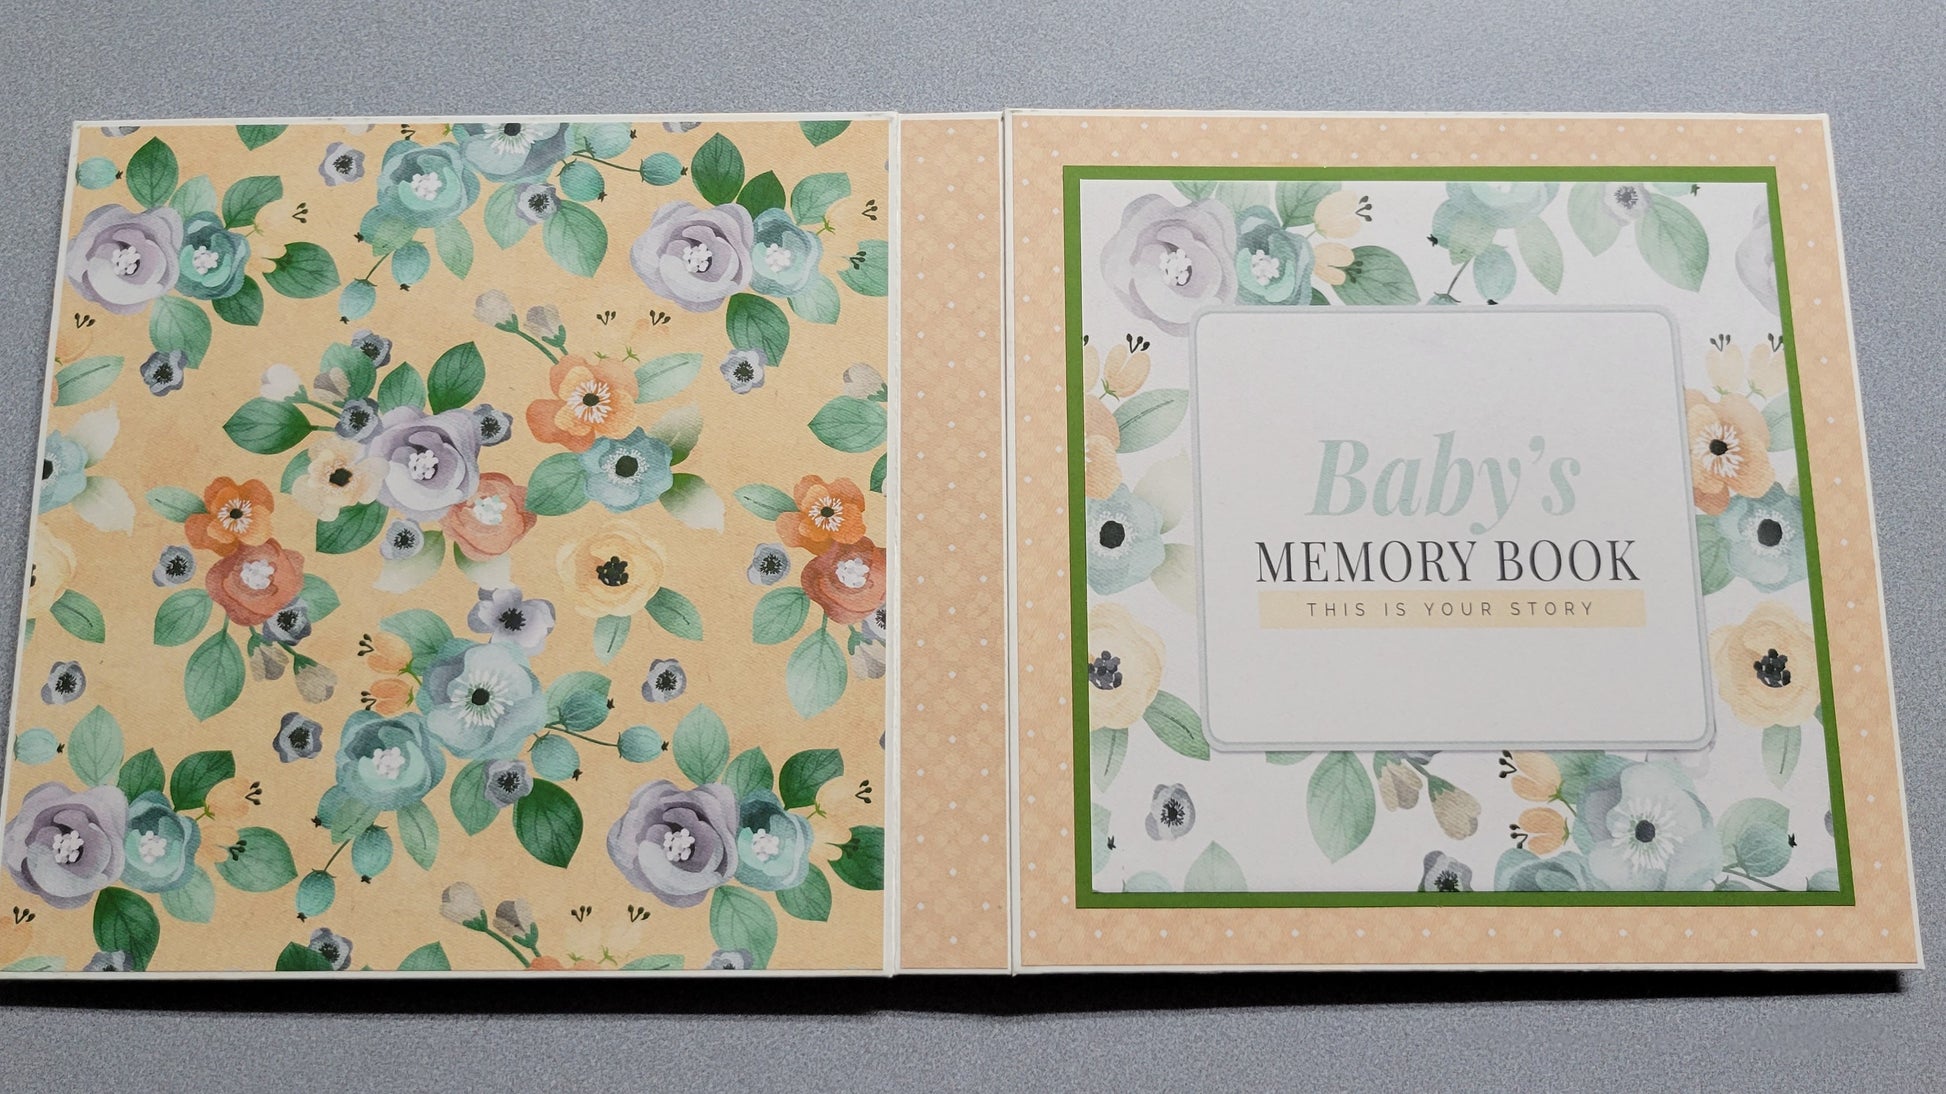 Baby's Memory Book Photo Album back and front cover.